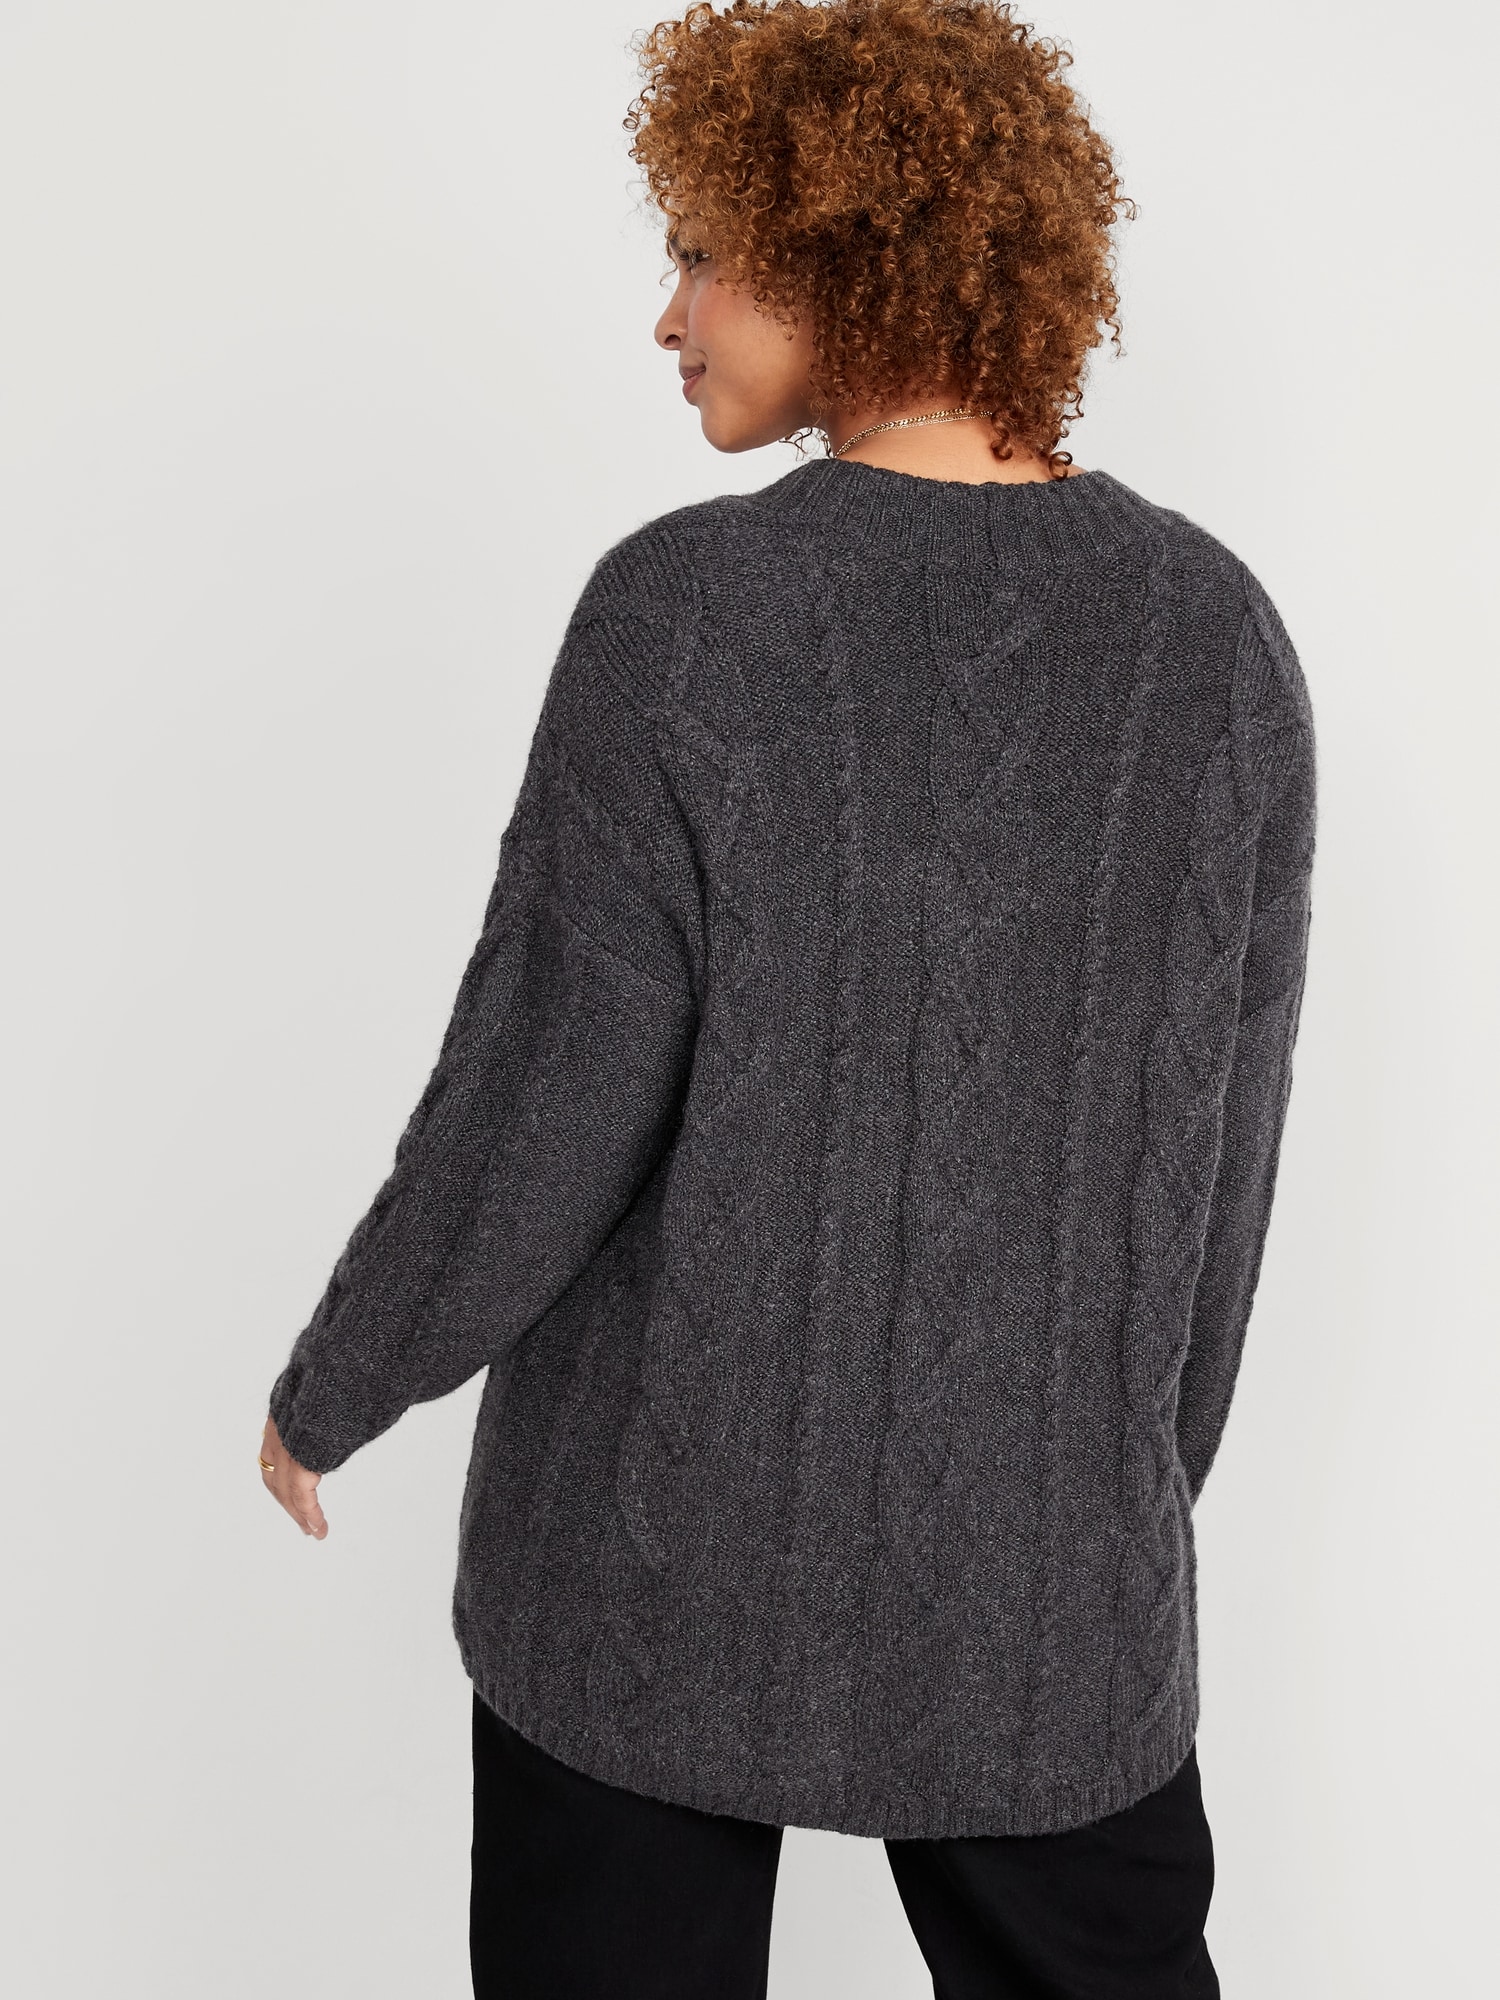 Old Cable-Knit Chunky Cardigan | for Women Sweater Navy Oversized